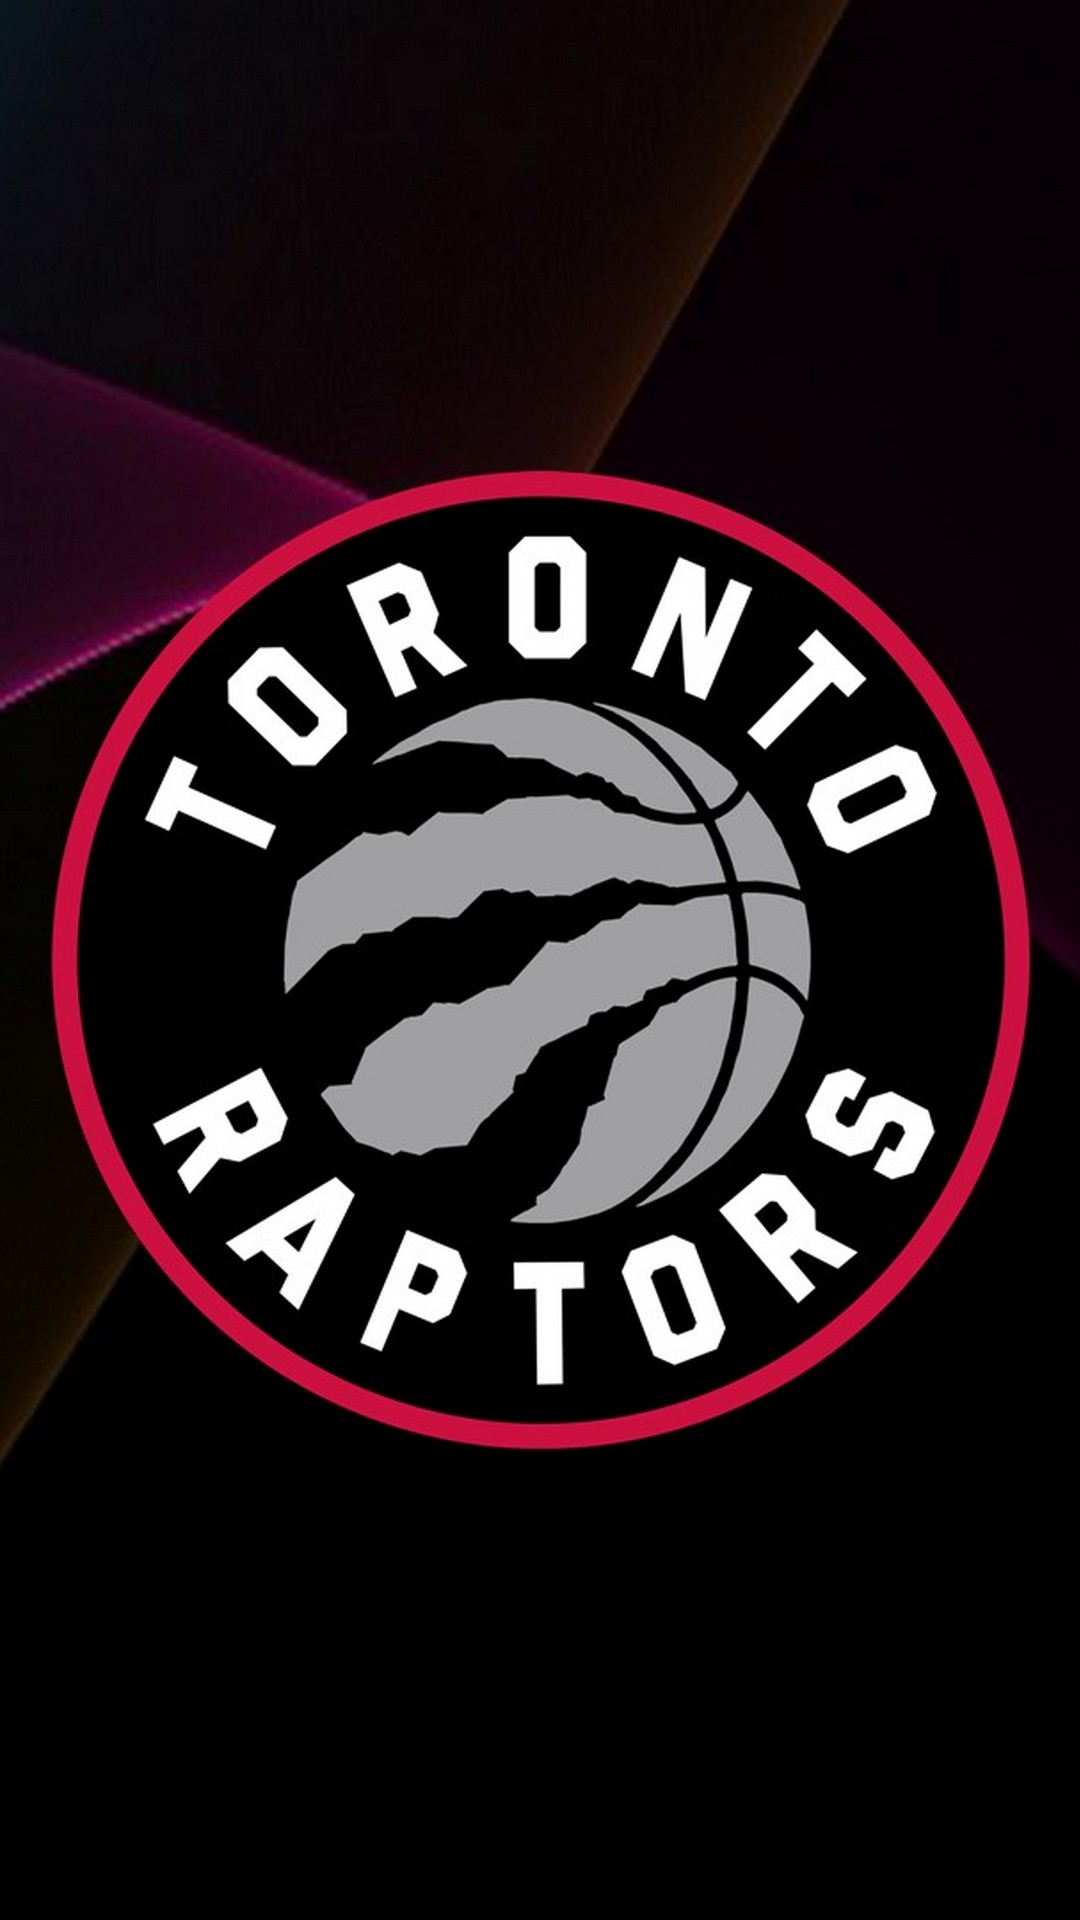 Wallpaper Toronto Raptors iPhone with image resolution 1080x1920 pixel. You can make this wallpaper for your iPhone 5, 6, 7, 8, X backgrounds, Mobile Screensaver, or iPad Lock Screen